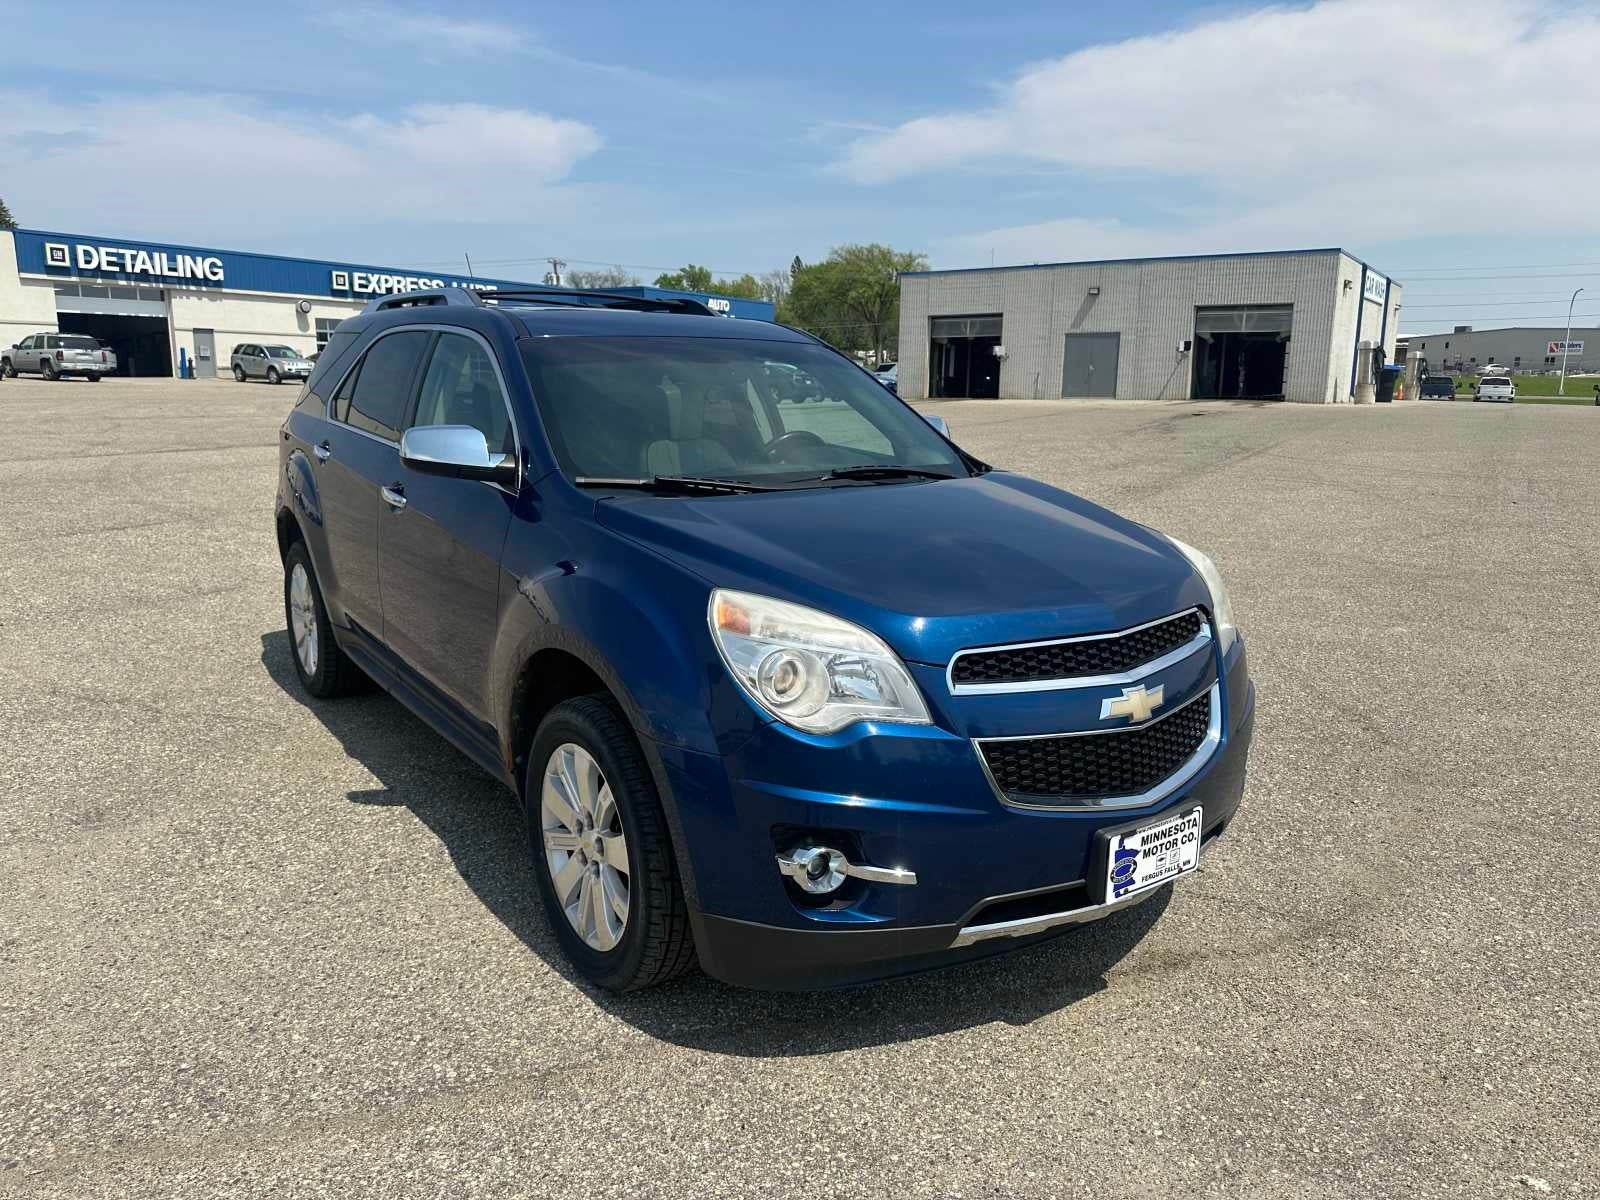 Used 2010 Chevrolet Equinox LTZ with VIN 2CNFLGEY2A6231723 for sale in Fergus Falls, Minnesota